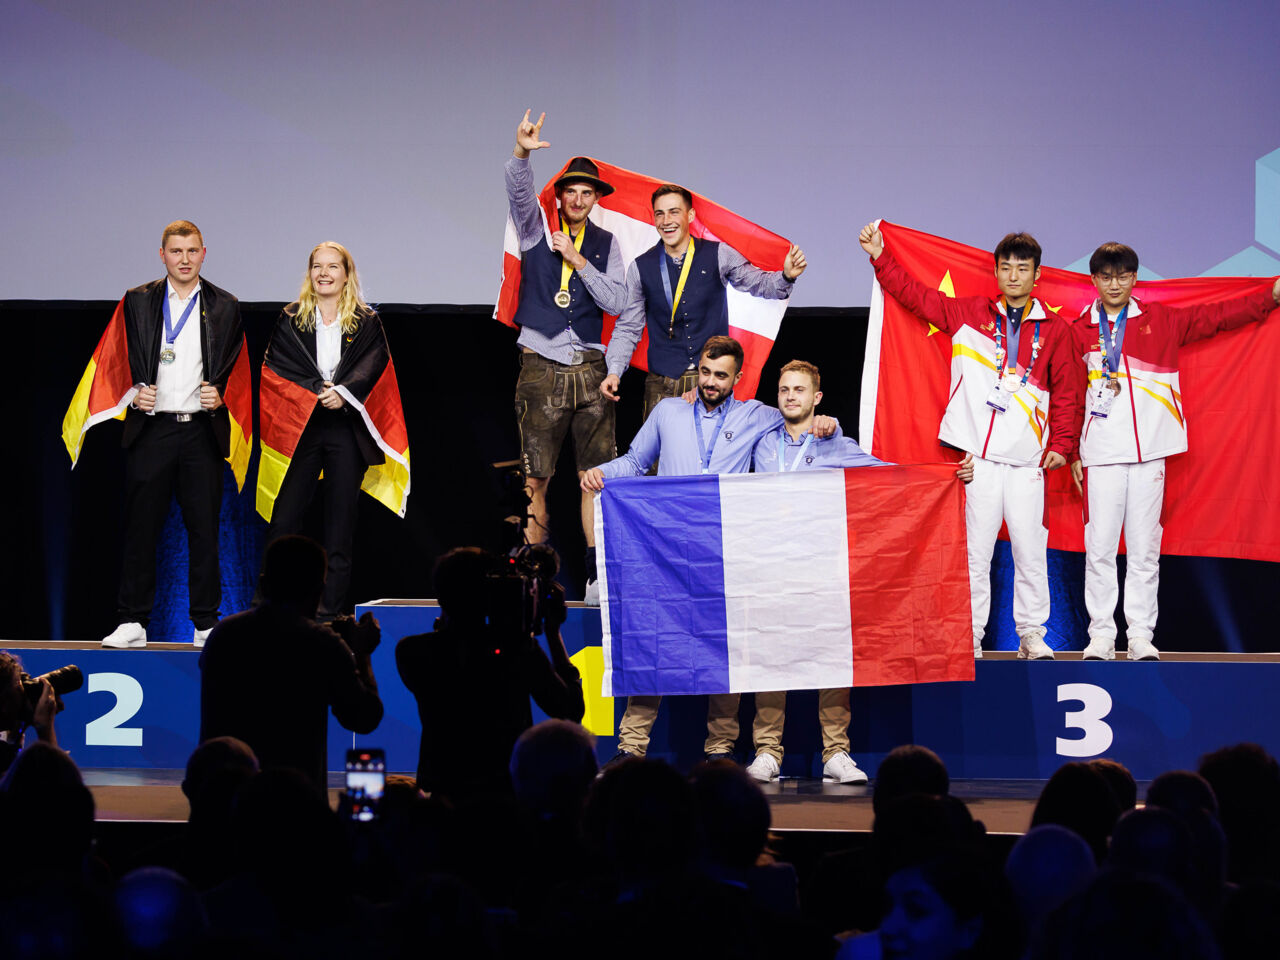 Competitors on the podium at the closing ceremony on 27 November at Messezentrum Salzburg.